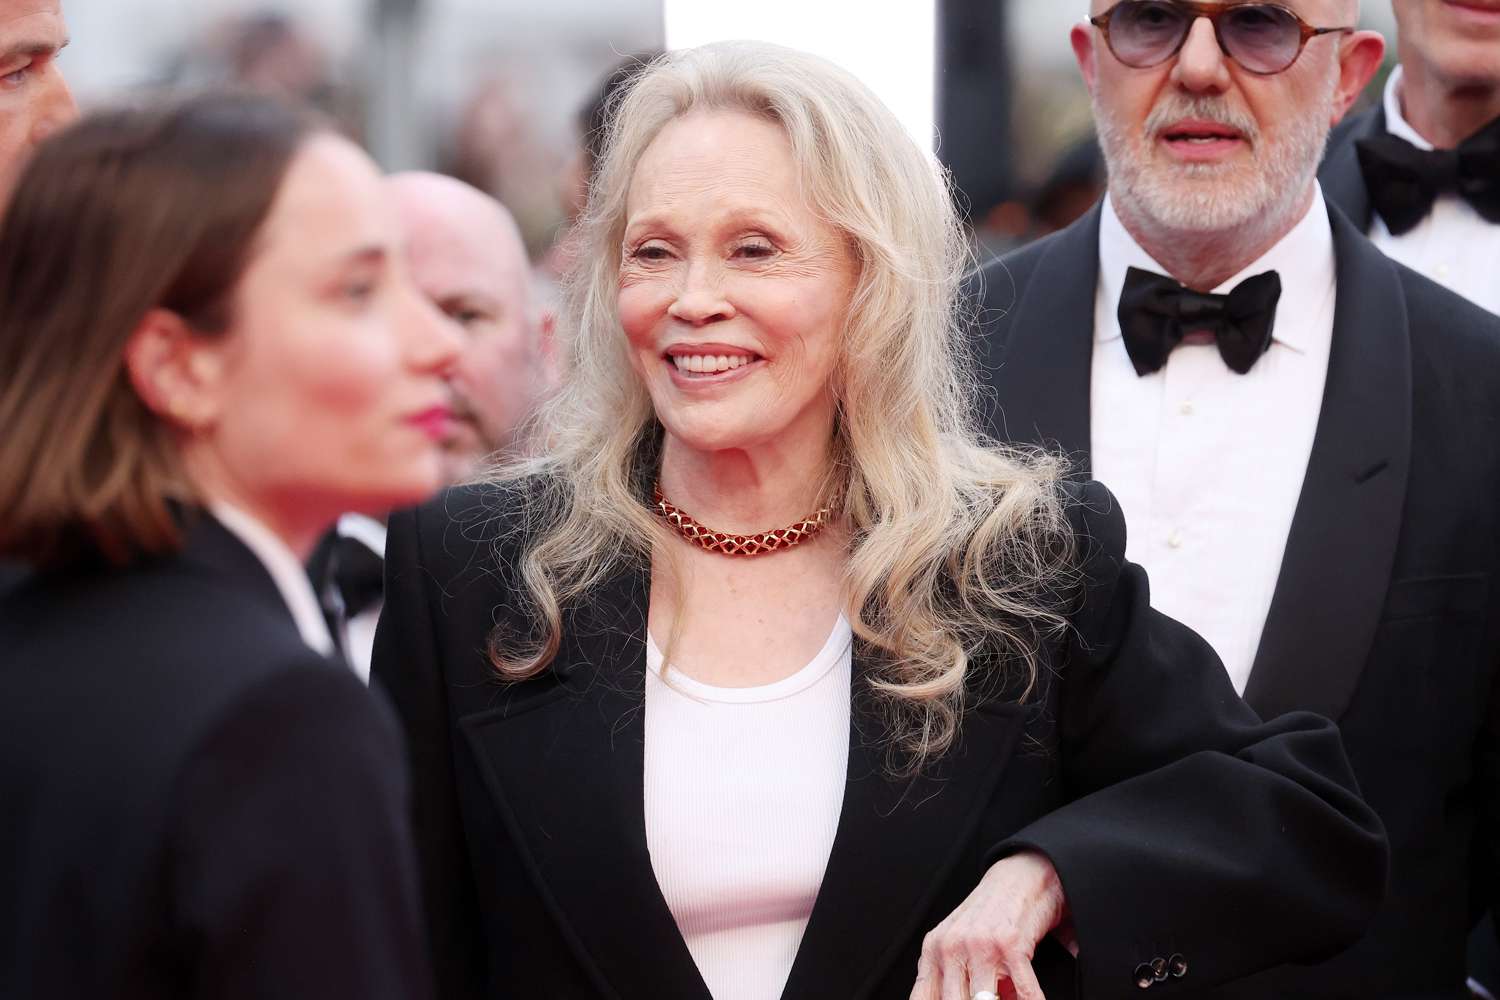 Faye Dunaway and Laurent Bouzereau attend the "Furiosa: A Mad Max Saga" (Furiosa: Une Saga Mad Max) Red Carpet at the 77th annual Cannes Film Festival at Palais des Festivals on 